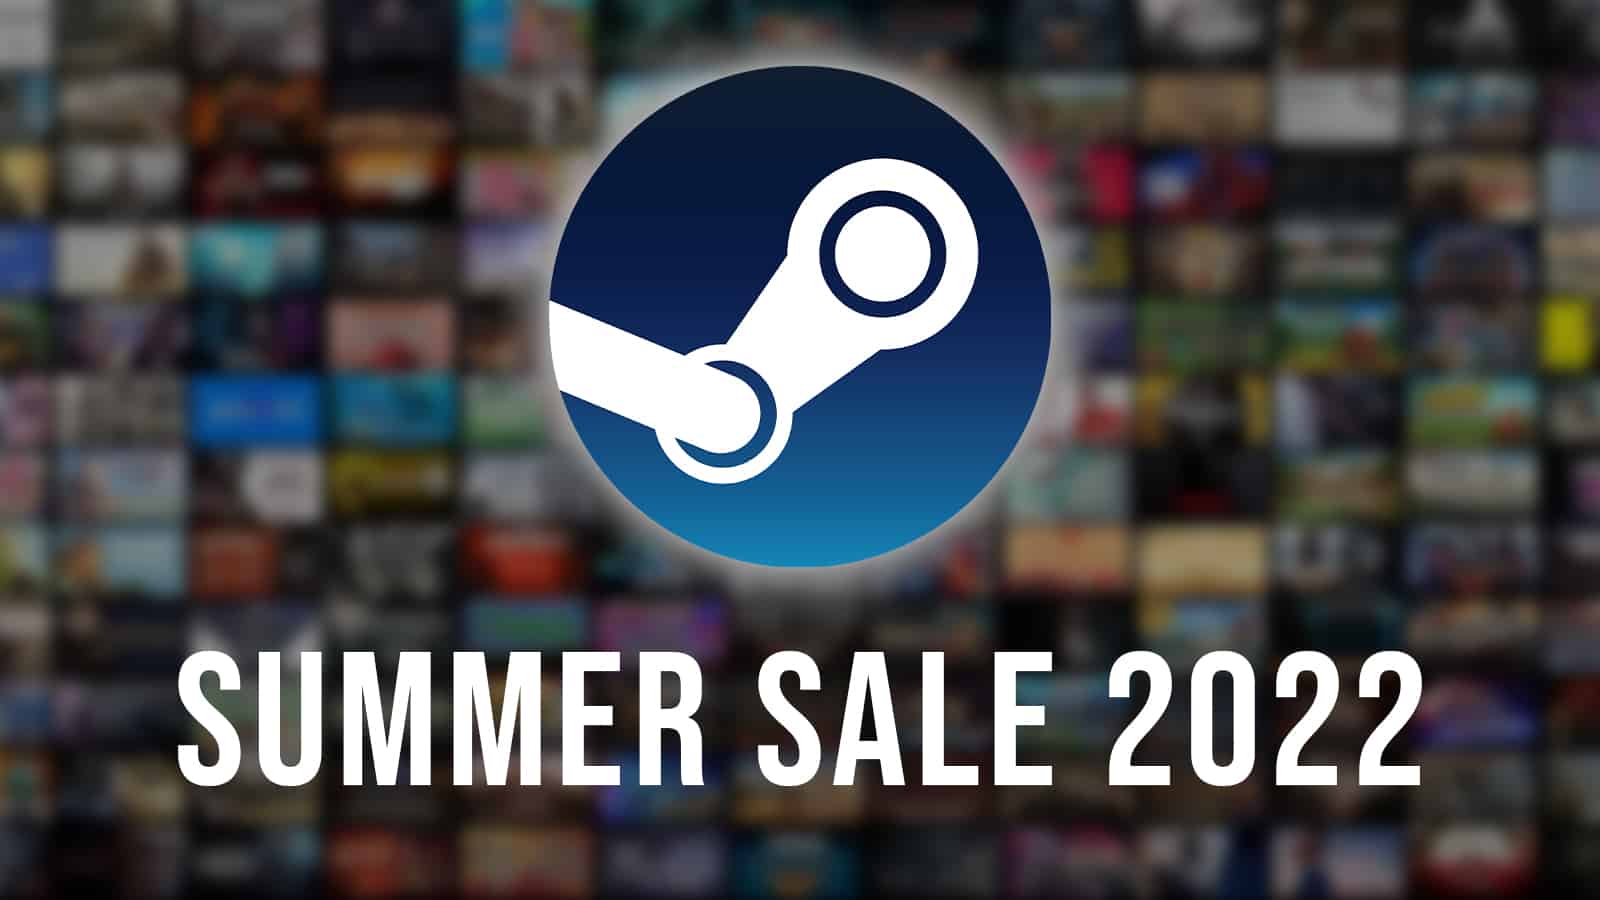 Steam Sale March 2022 is Now Live: FIFA 22, Monster: Hunter Rise, Rainbow  Six Siege, More Available for Discount - MySmartPrice